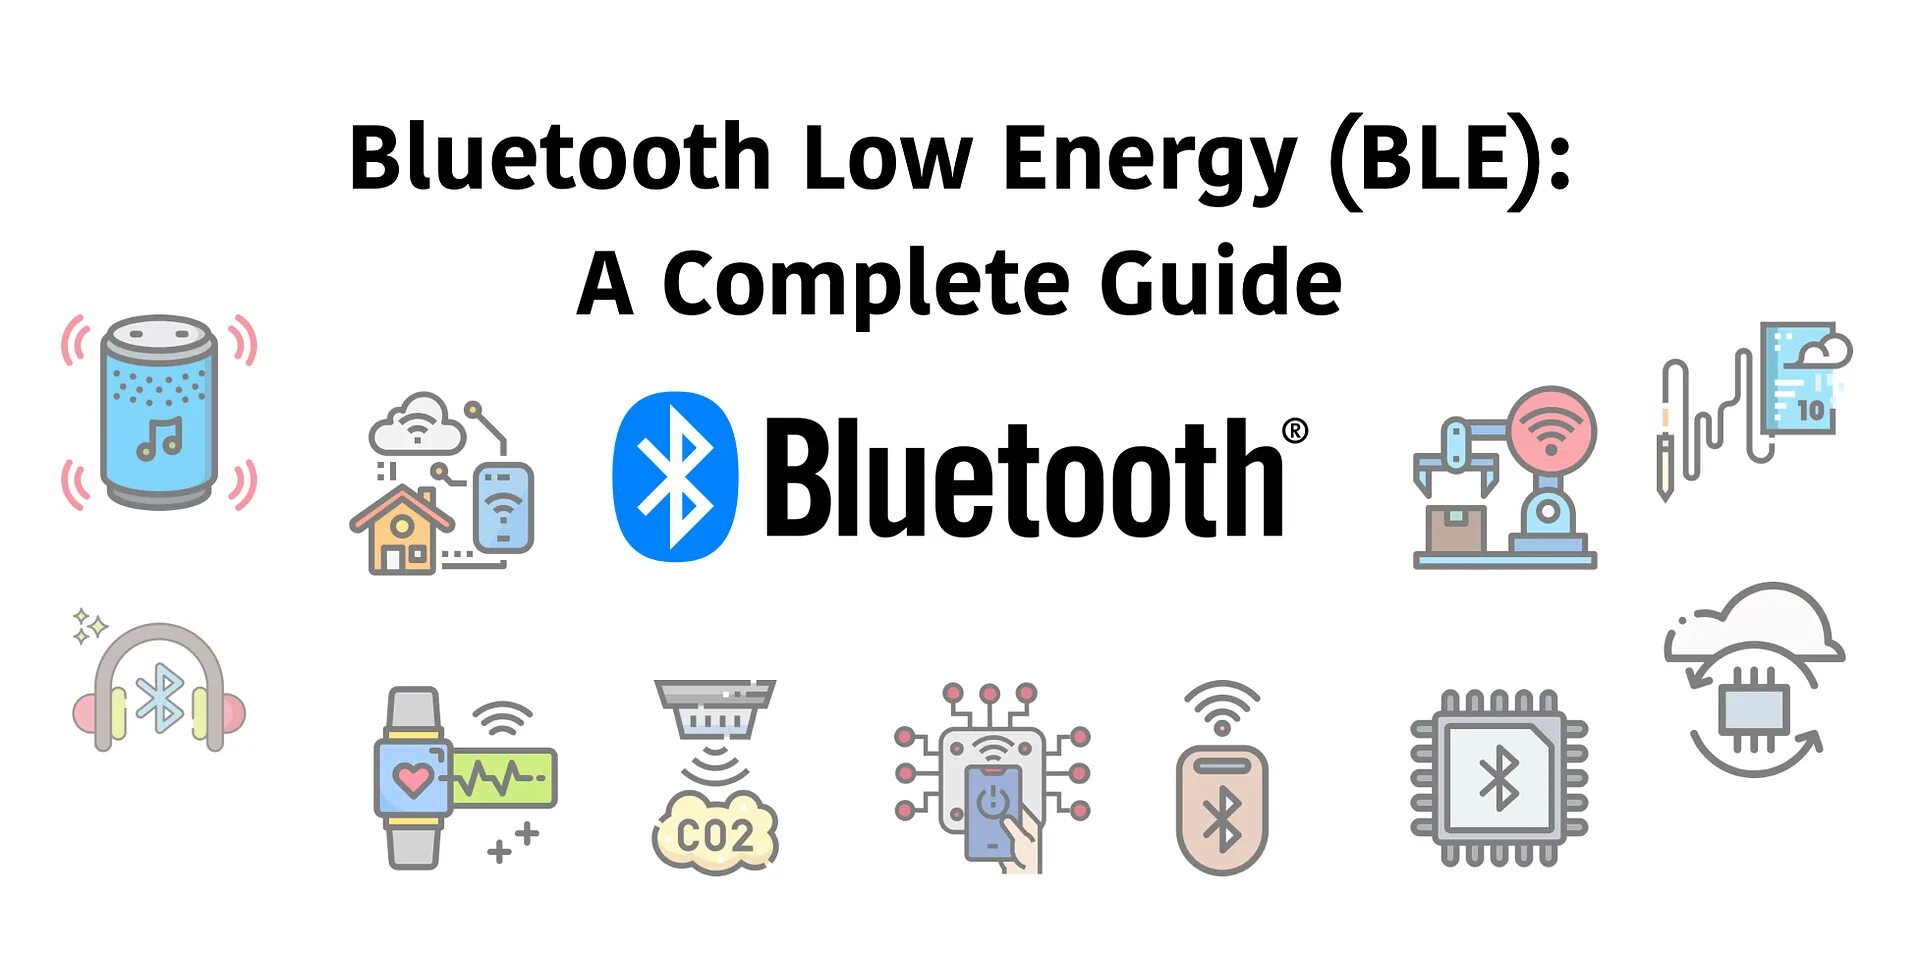 Bluetooth Low Energy (ble).